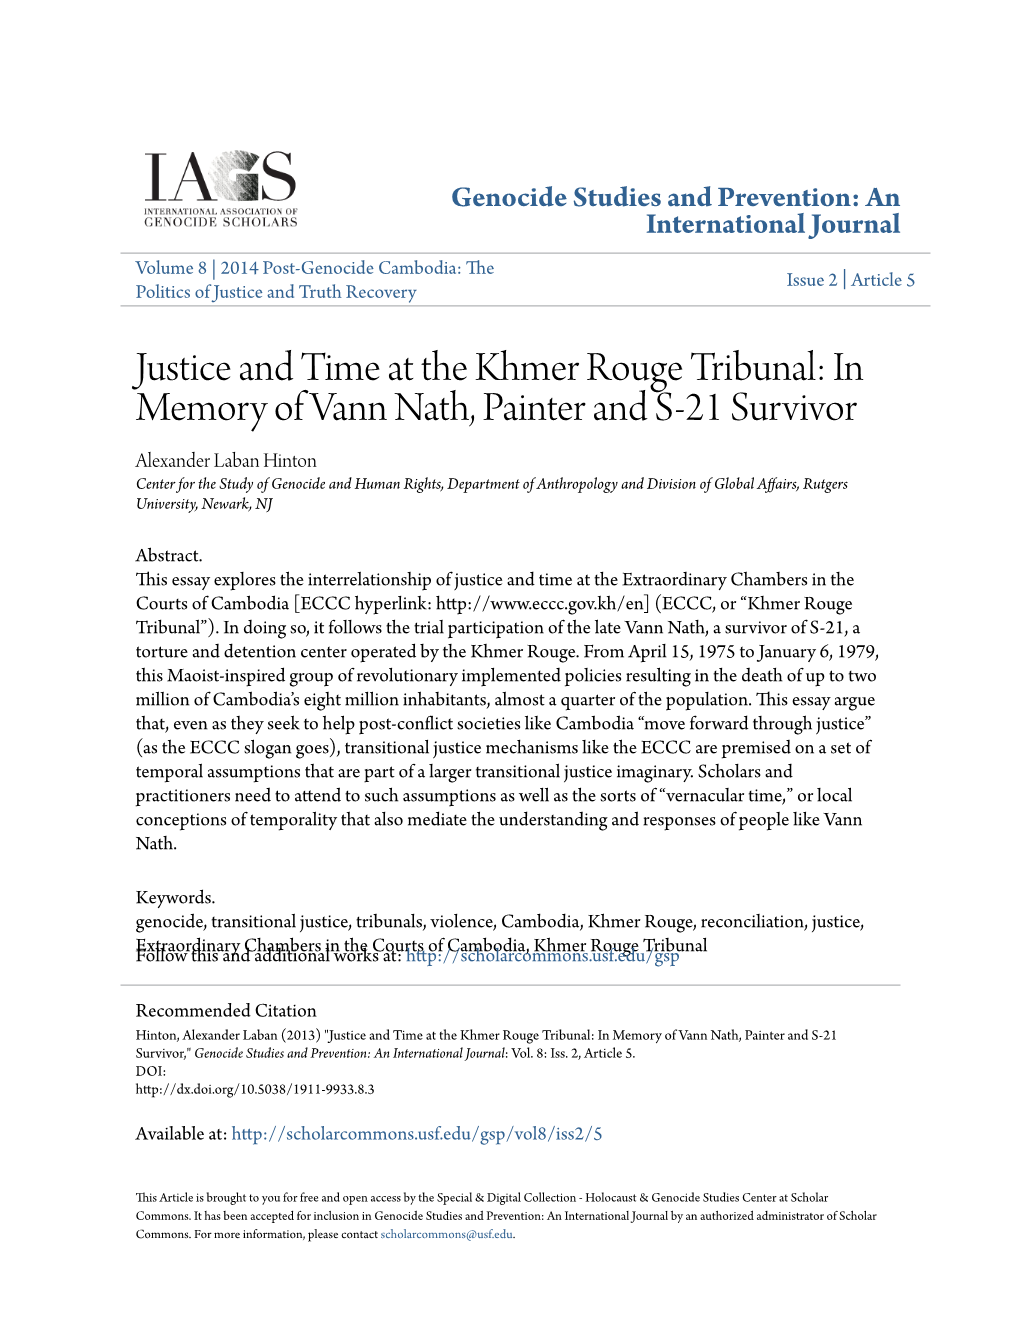 Justice and Time at the Khmer Rouge Tribunal: in Memory of Vann Nath